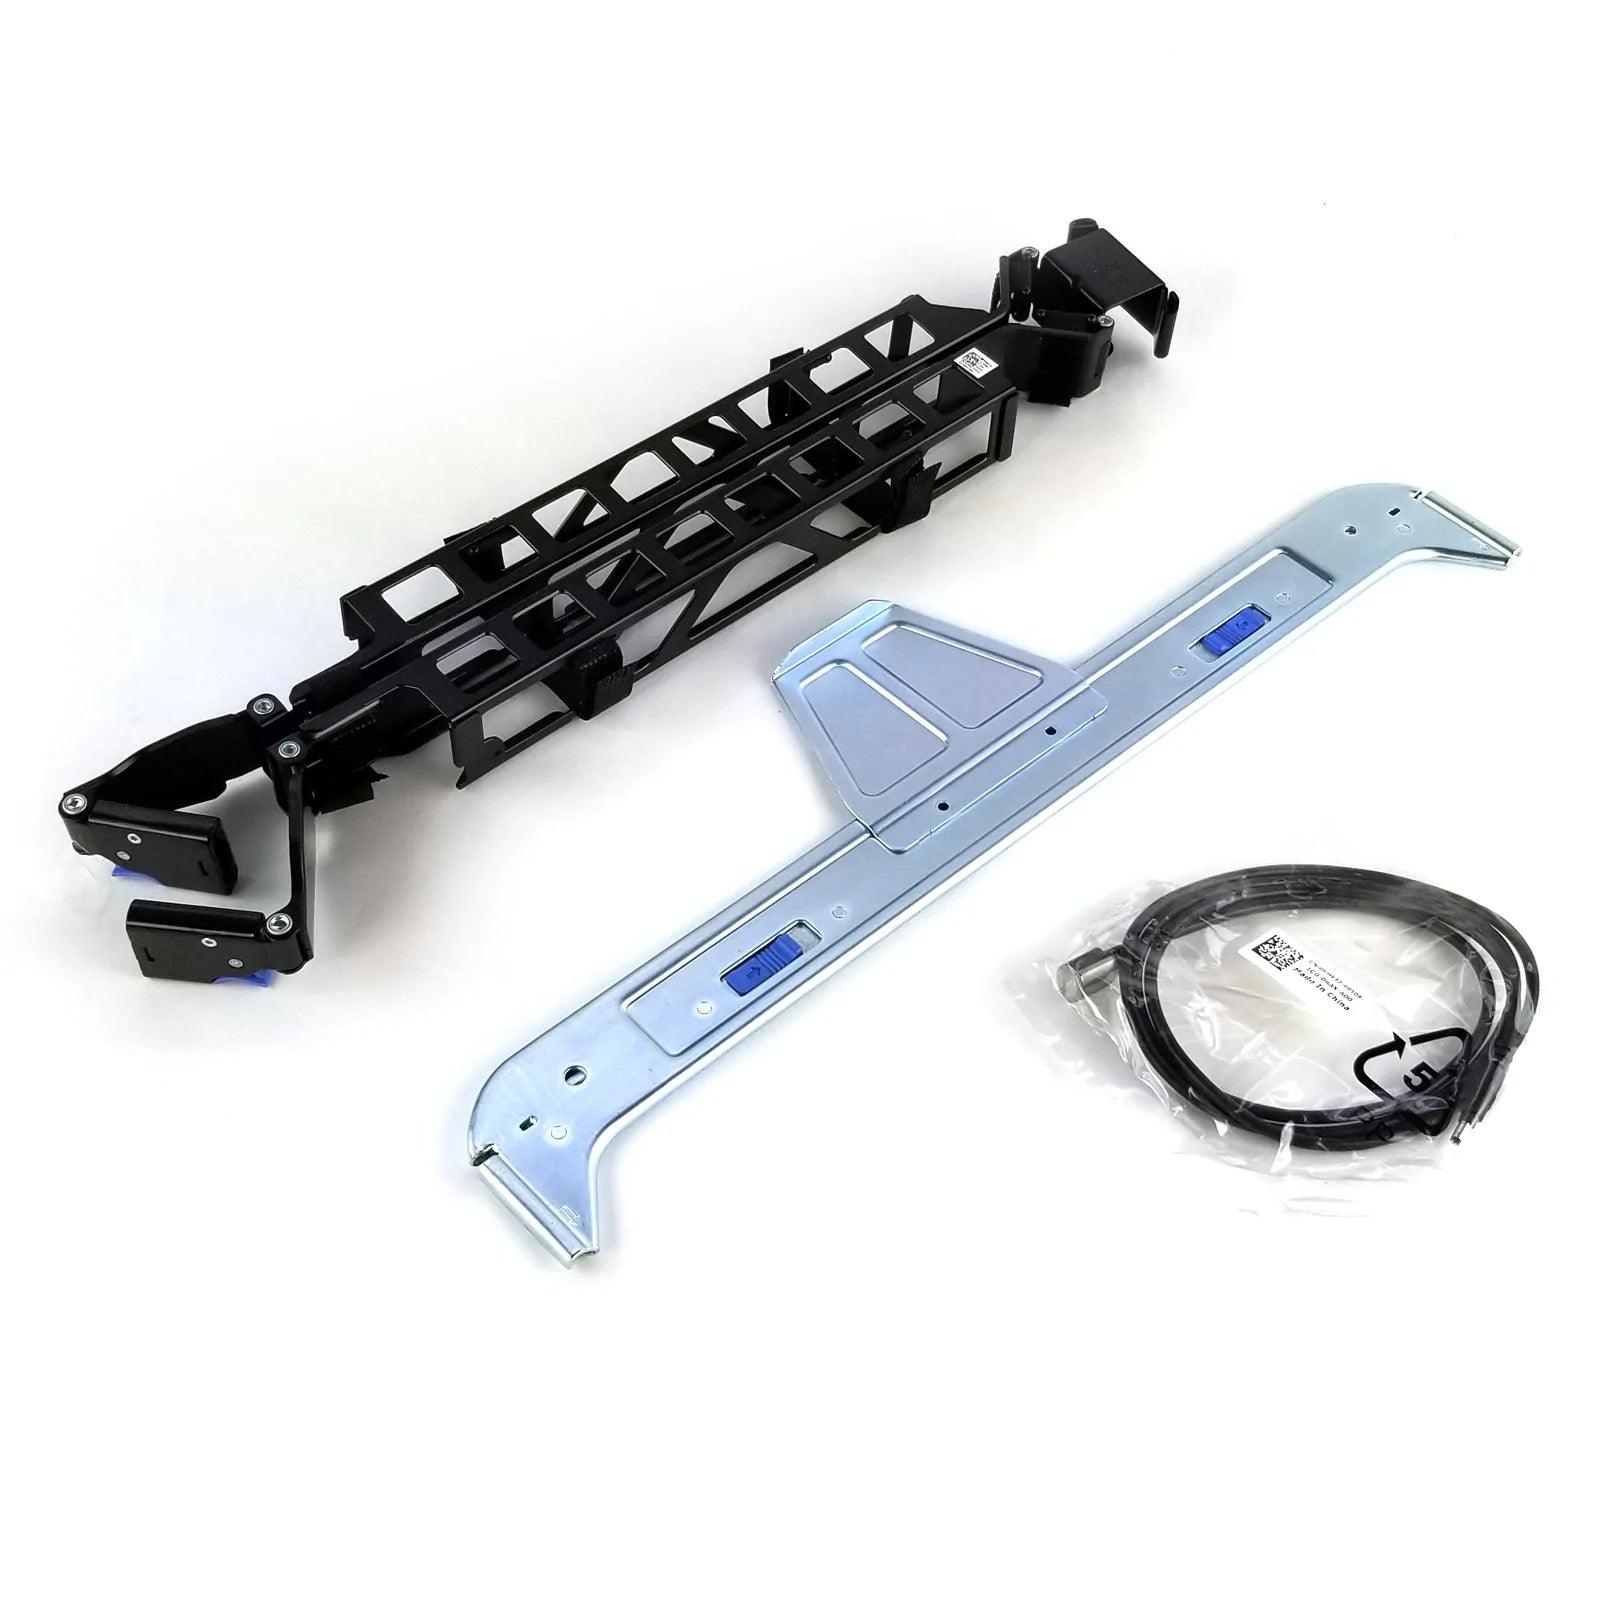 Cable Management Arm Kit for Dell PowerEdge 2U Server - Keep Your Server  Cables Organized!